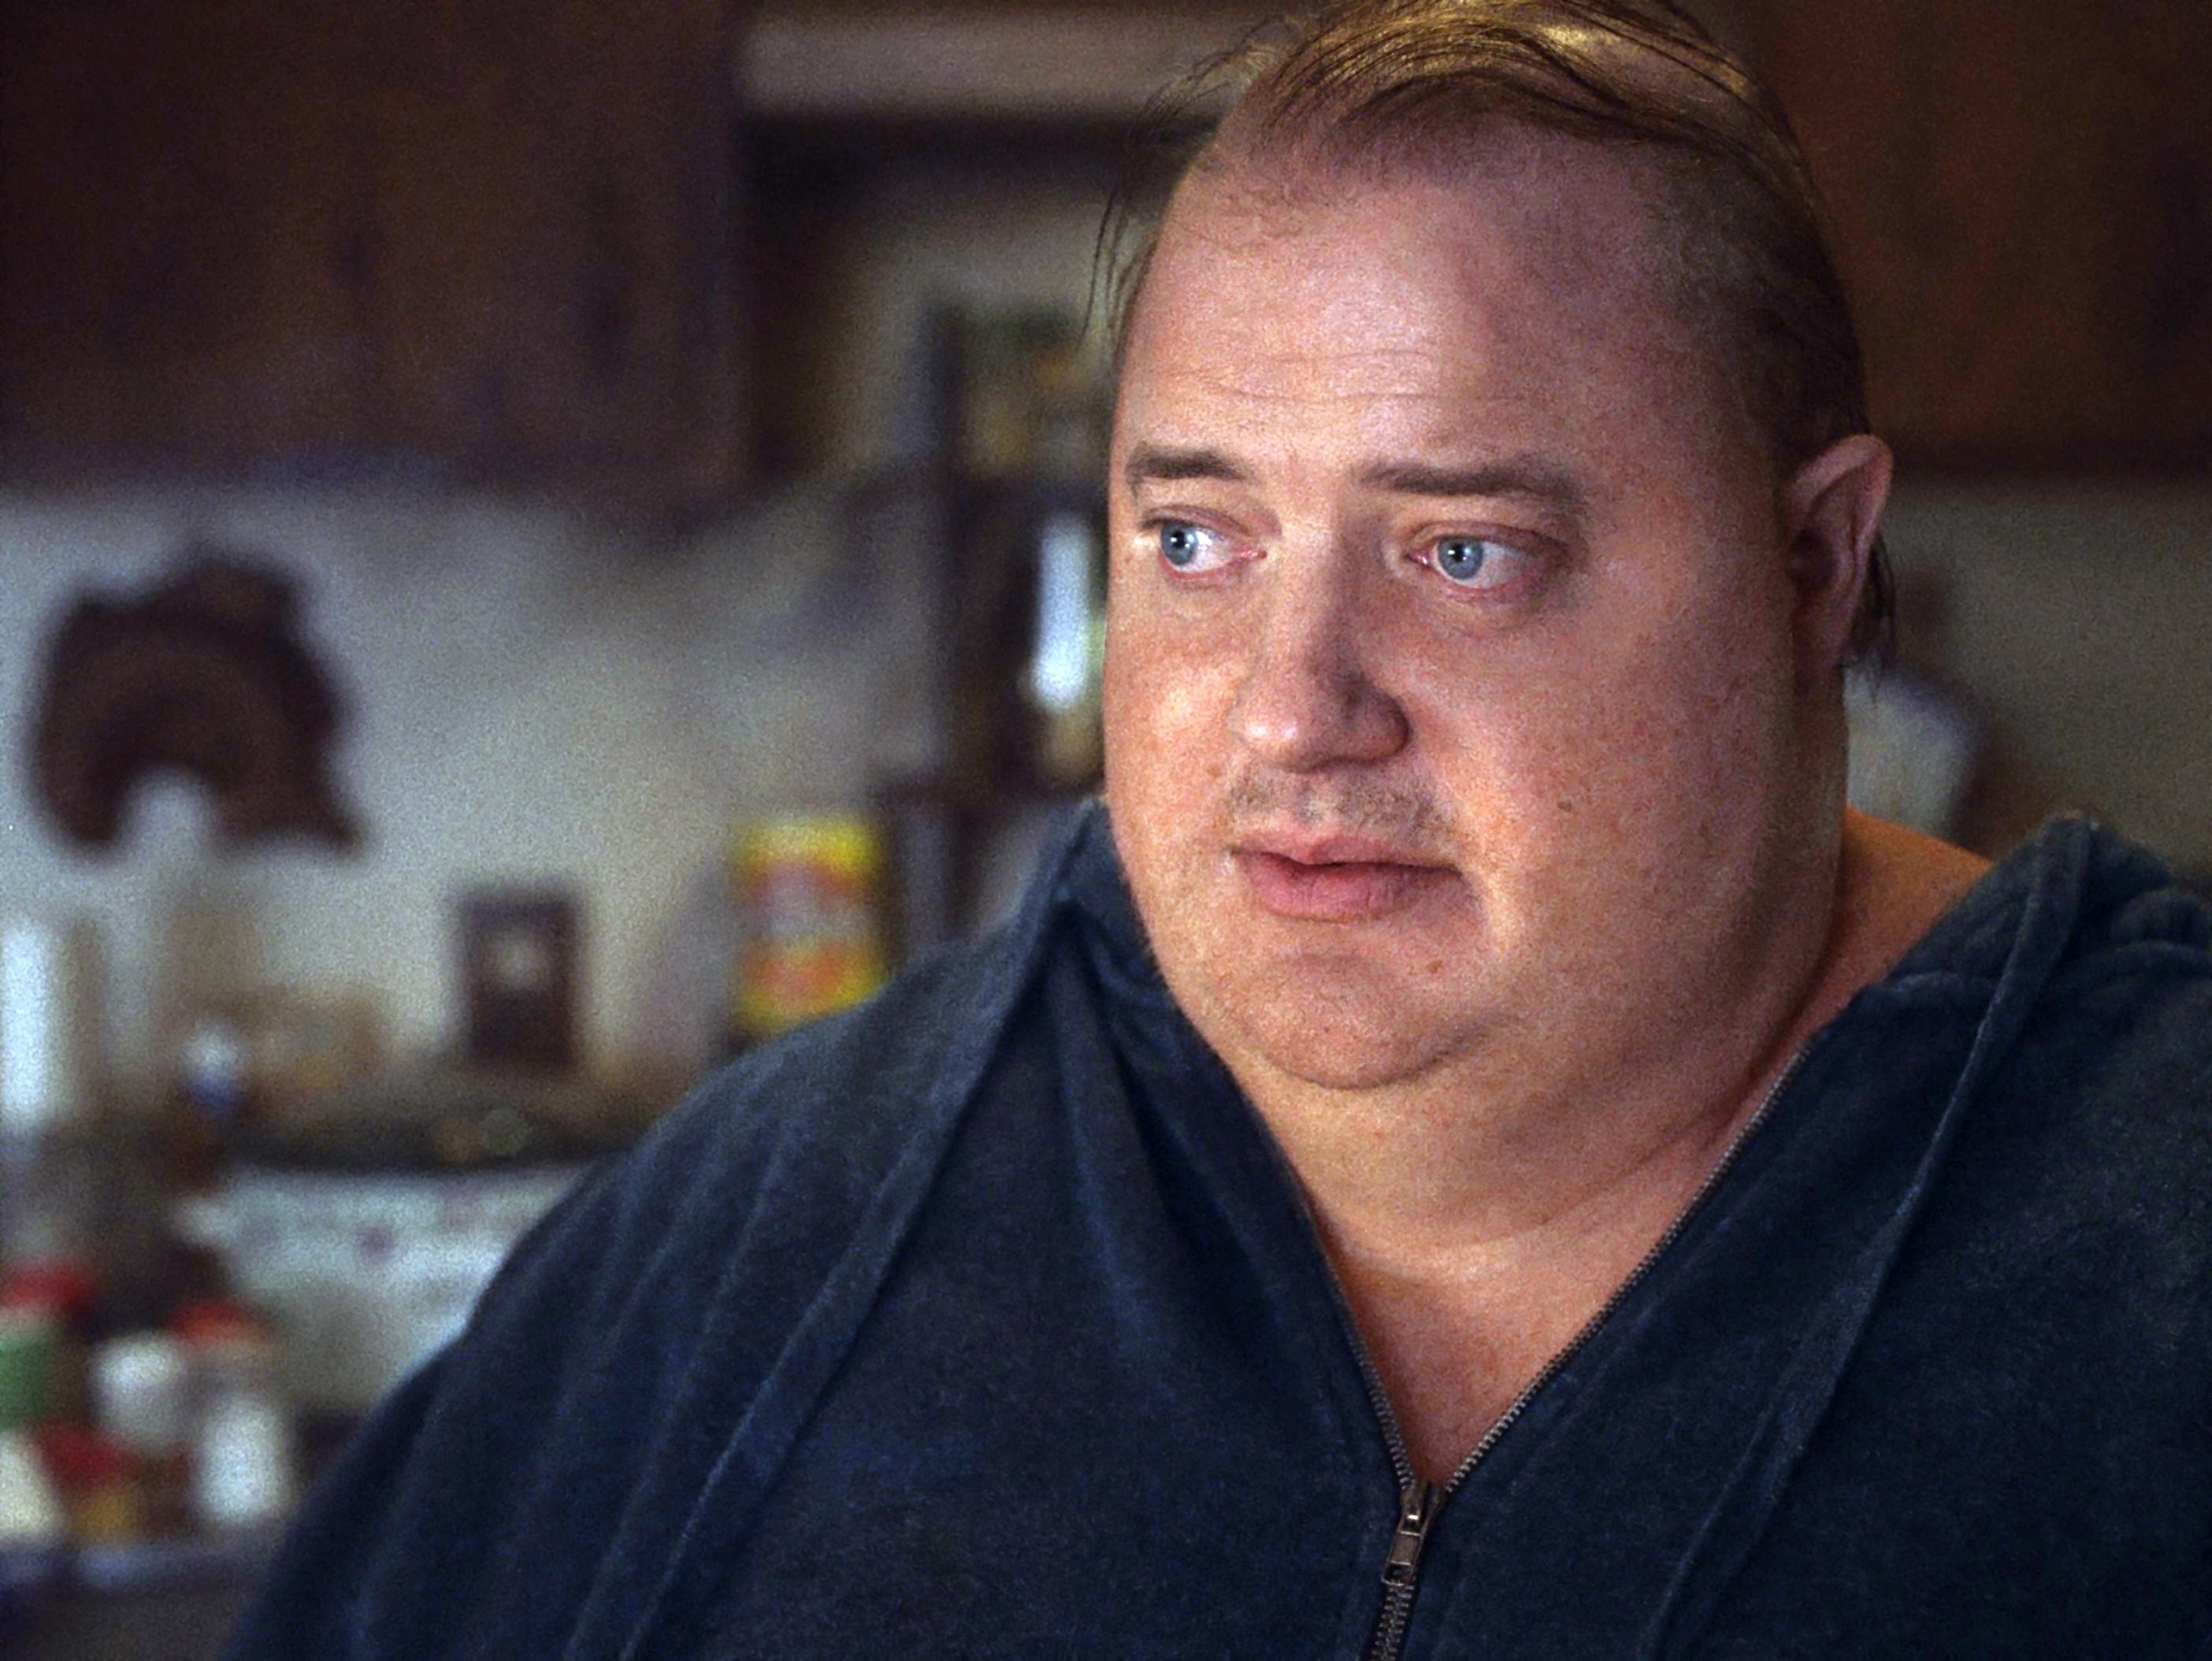 A closeup of Brendan in prosthetics and a fat suit in a scene from the film